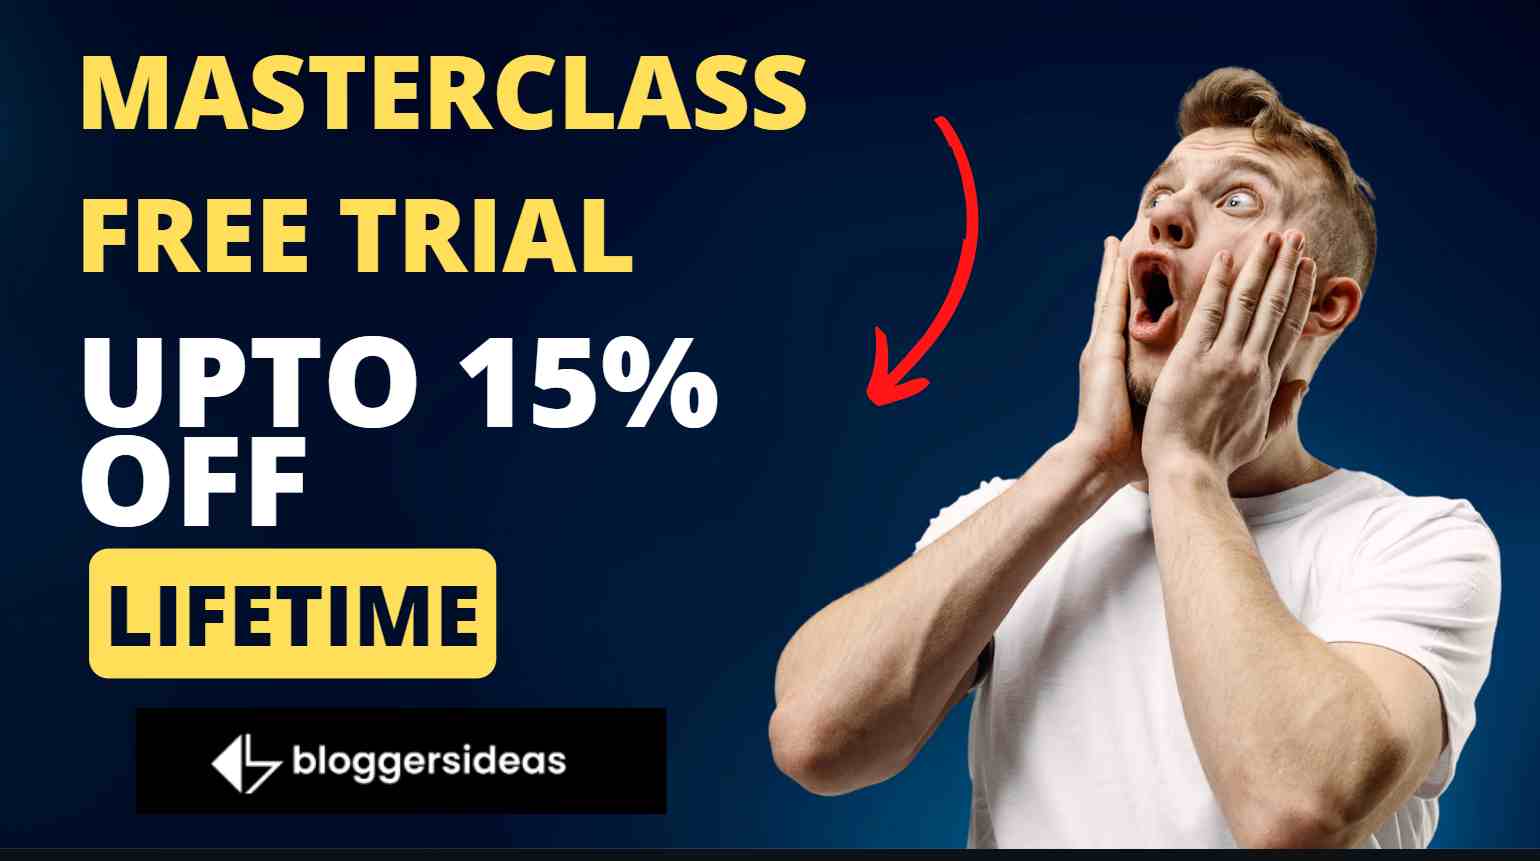 Masterclass free trial offer latest